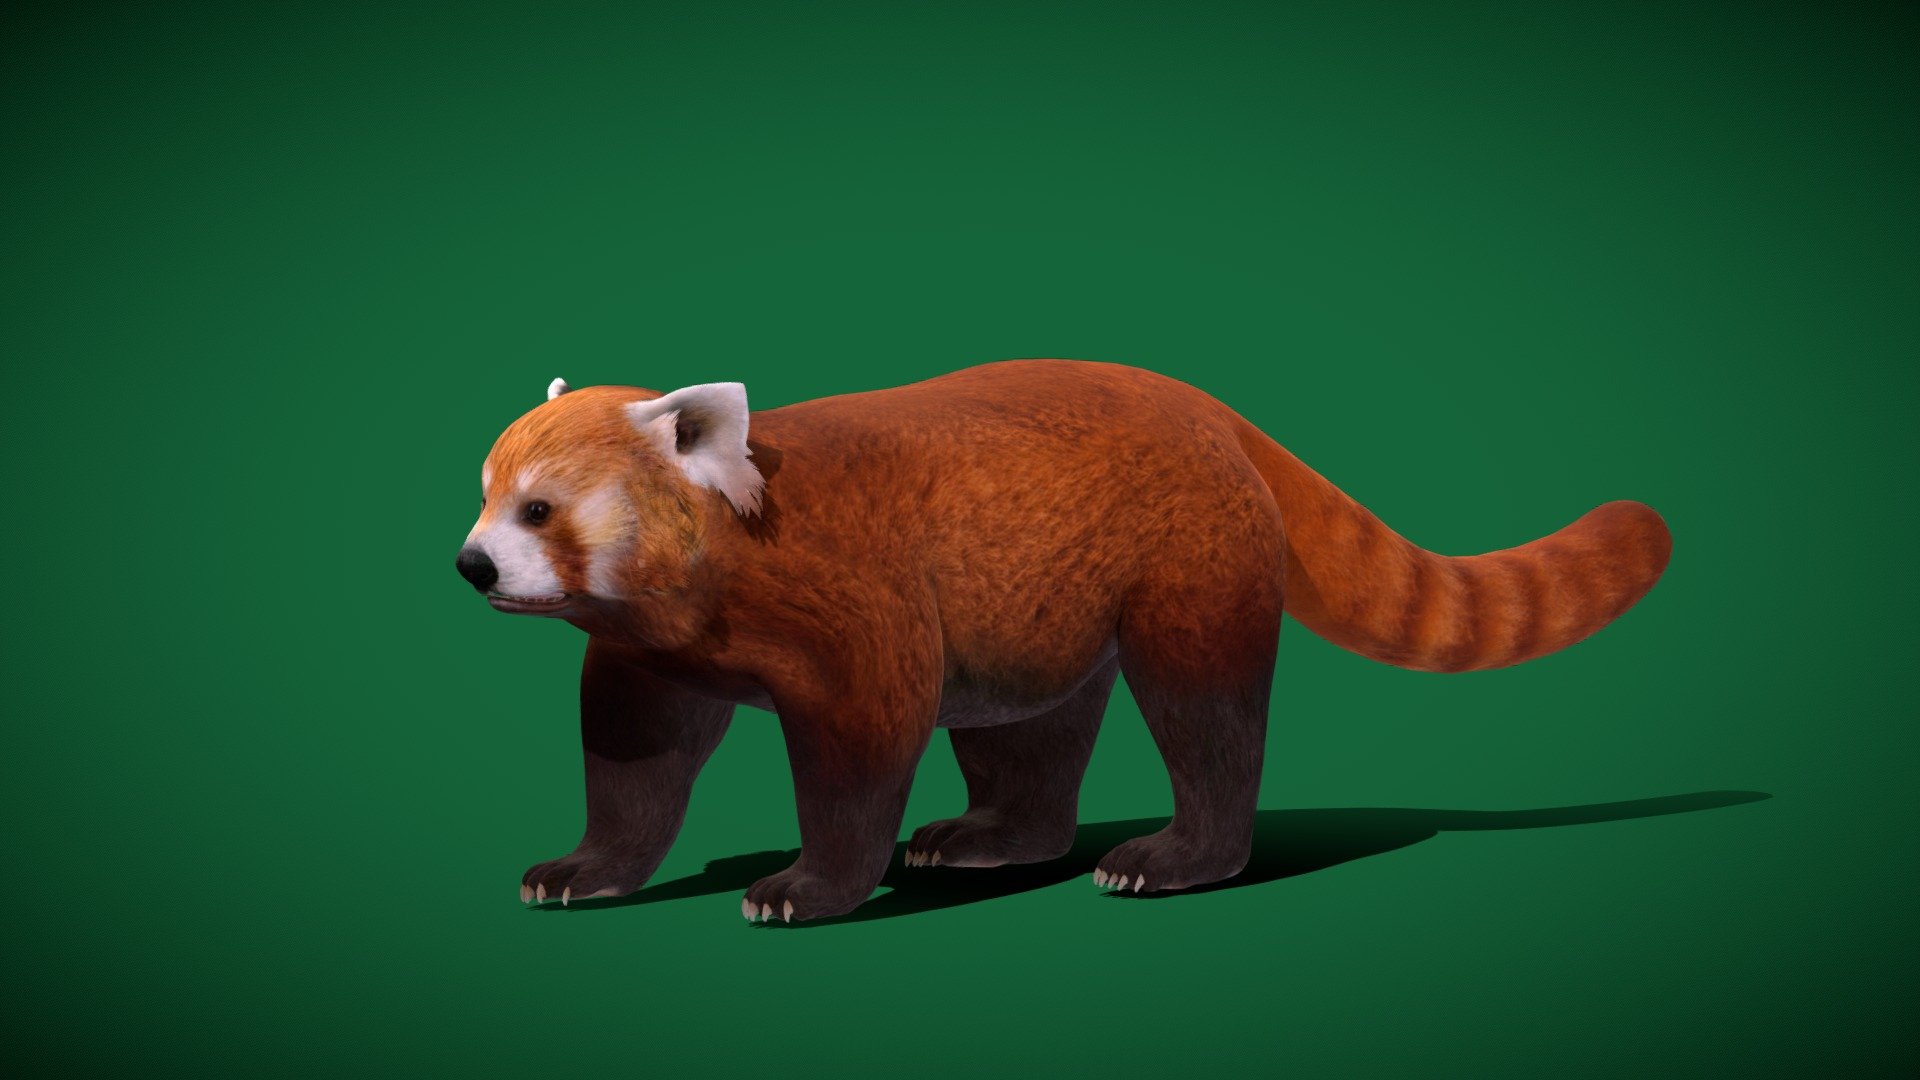 Red Panda (Endangered)Cute,Pet,Animalia

Ailurus fulgens Animal small Mammal (Lesser panda)Himalayas,southwestern China

1 Draw Calls

MidPoly

Game Ready (Character)

Subdivision Surface Ready

12- Animations 

4K PBR Textures 2 Material

Unreal/Unity FBX 

Blend File 3.6.5 LTS / 4

USDZ File (AR Ready). Real Scale Dimension (Xcode ,Reality Composer, Keynote Ready)

Textures Files

GLB File (Unreal 5.1 Plus Native Support)


Gltf File ( Spark AR, Lens Studio(SnapChat) , Effector(Tiktok) , Spline, Play Canvas,Omiverse ) Compatible




Triangles -34192



Faces -20368

Edges -39042

Vertices -18741

Diffuse, Metallic, Roughness , Normal Map ,Specular Map,AO


Ailuridae is a family in the mammal order Carnivora. The family consists of the red panda and its extinct relatives. Georges Cuvier first described Ailurus as belonging to the raccoon family in 1825; this classification has been controversial ever since 3d model